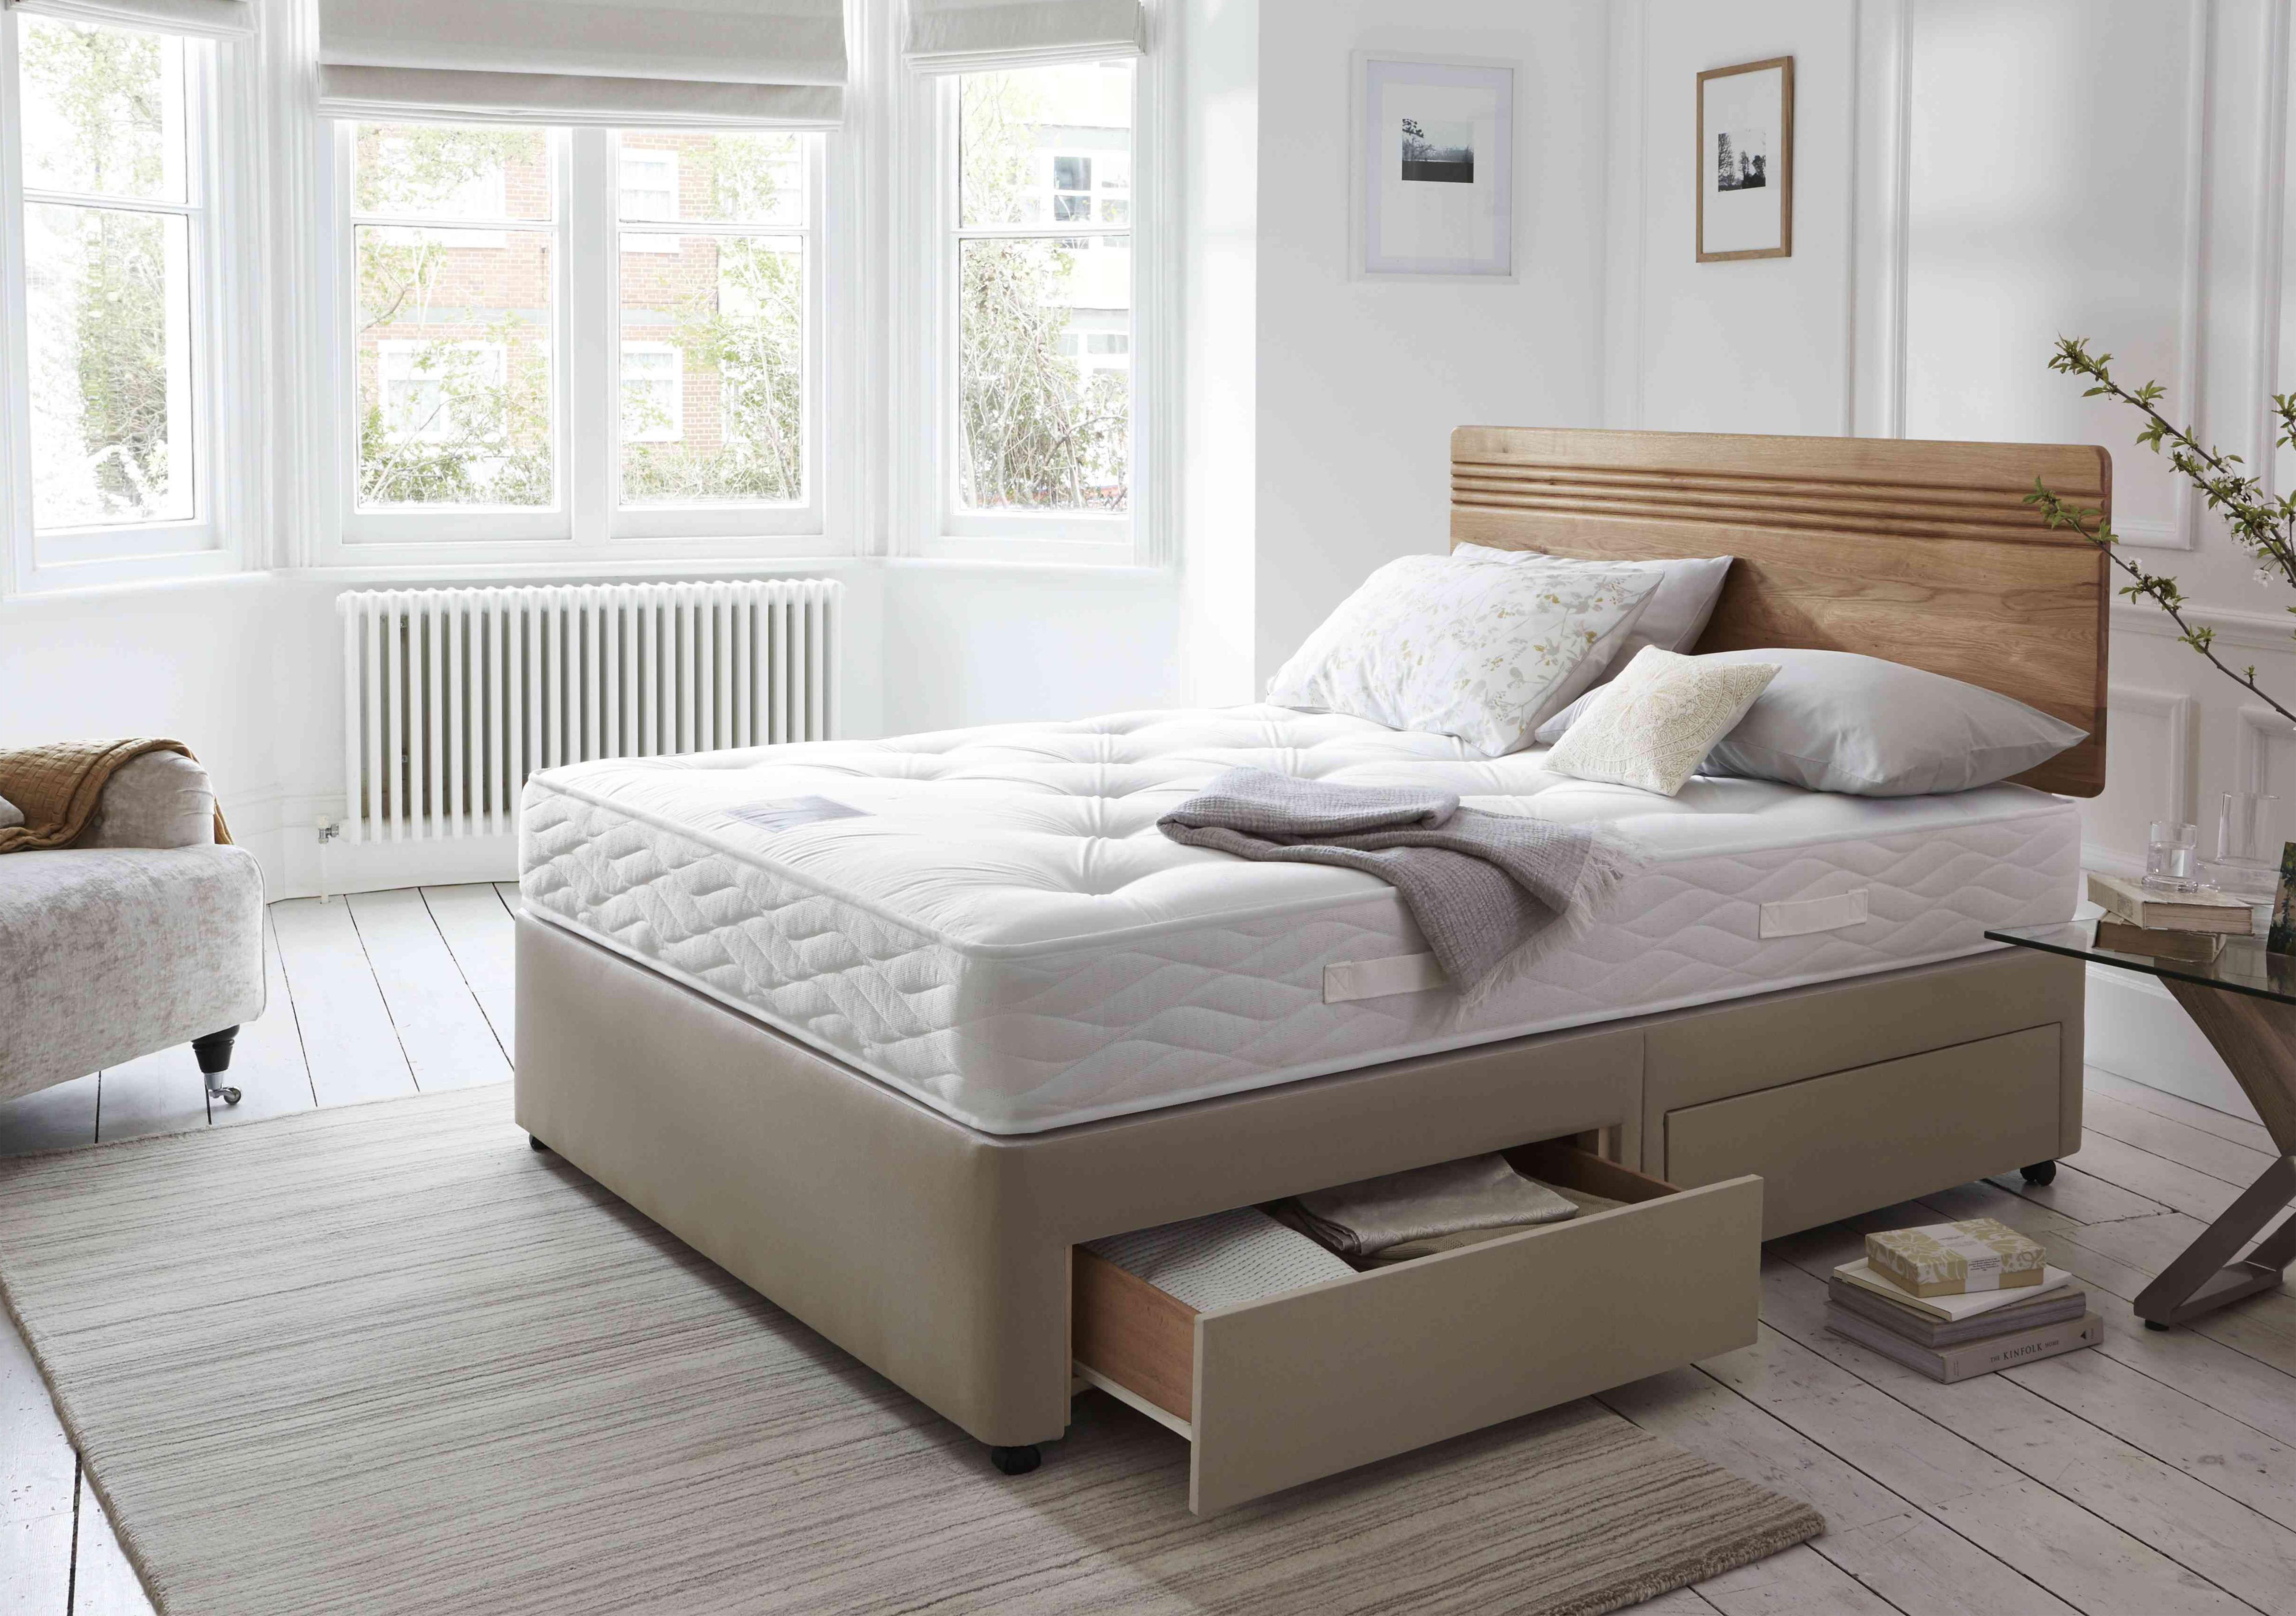 Double beds - Wide Selection